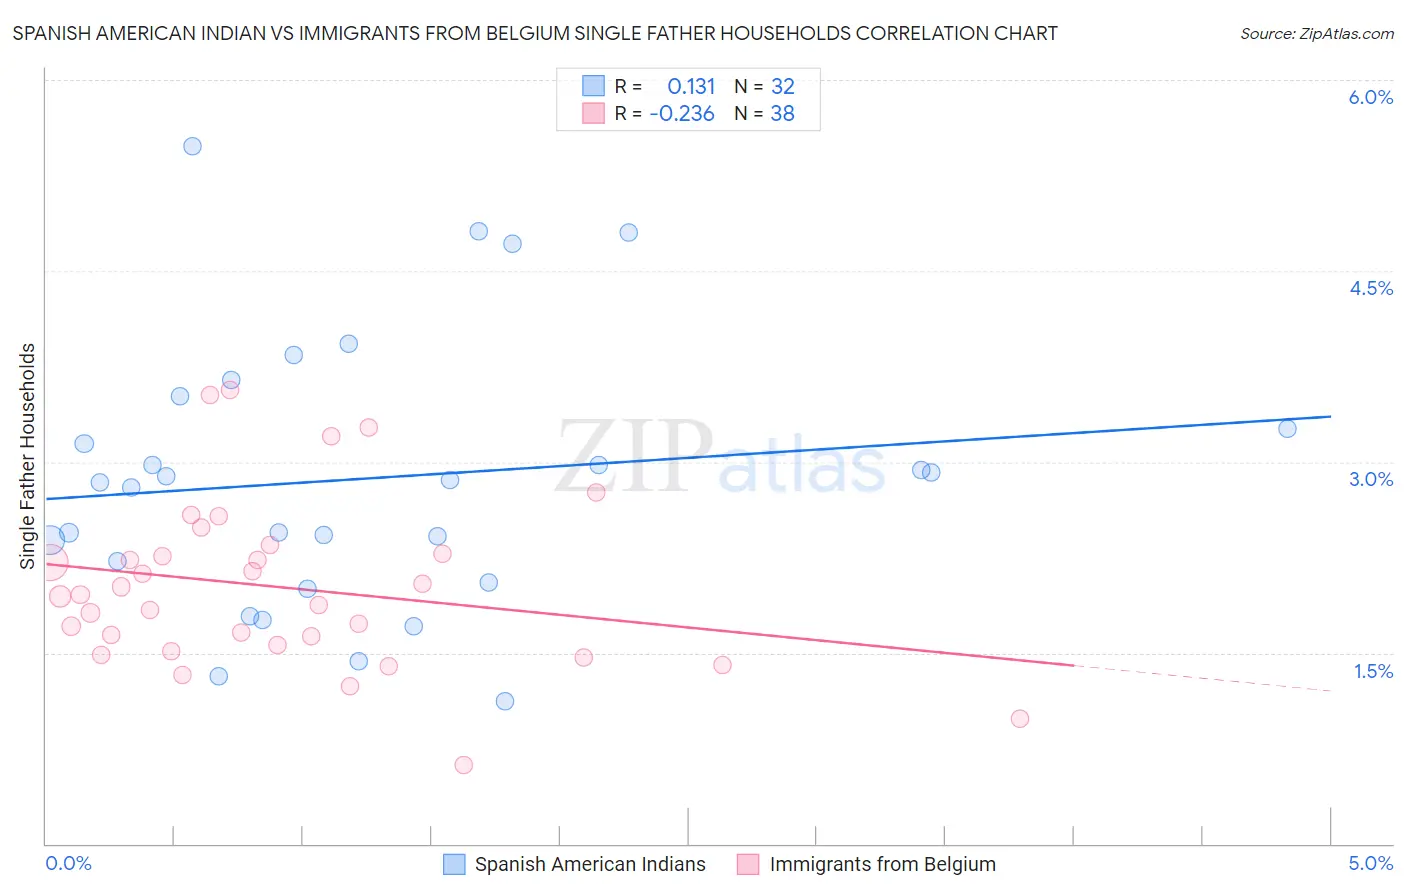 Spanish American Indian vs Immigrants from Belgium Single Father Households